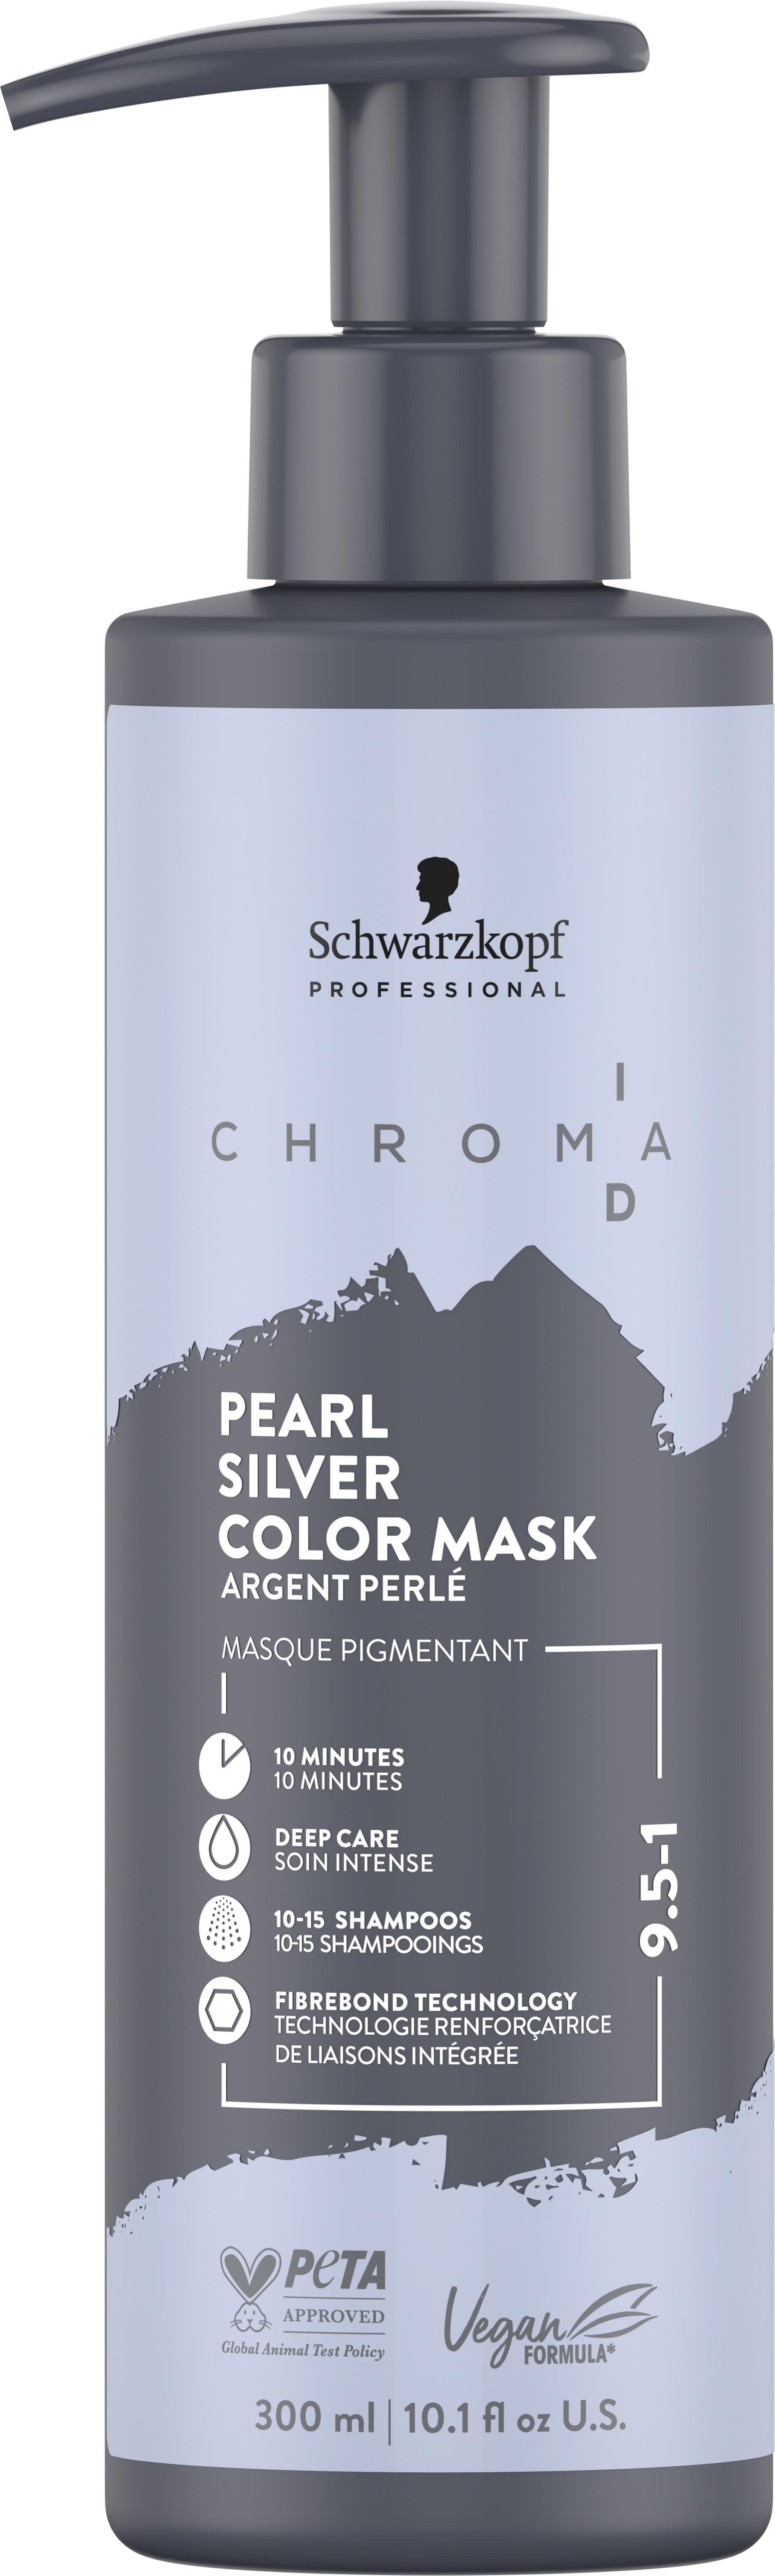 Chroma ID - Bonding Color Mask 9,5-1 Pearl Silver